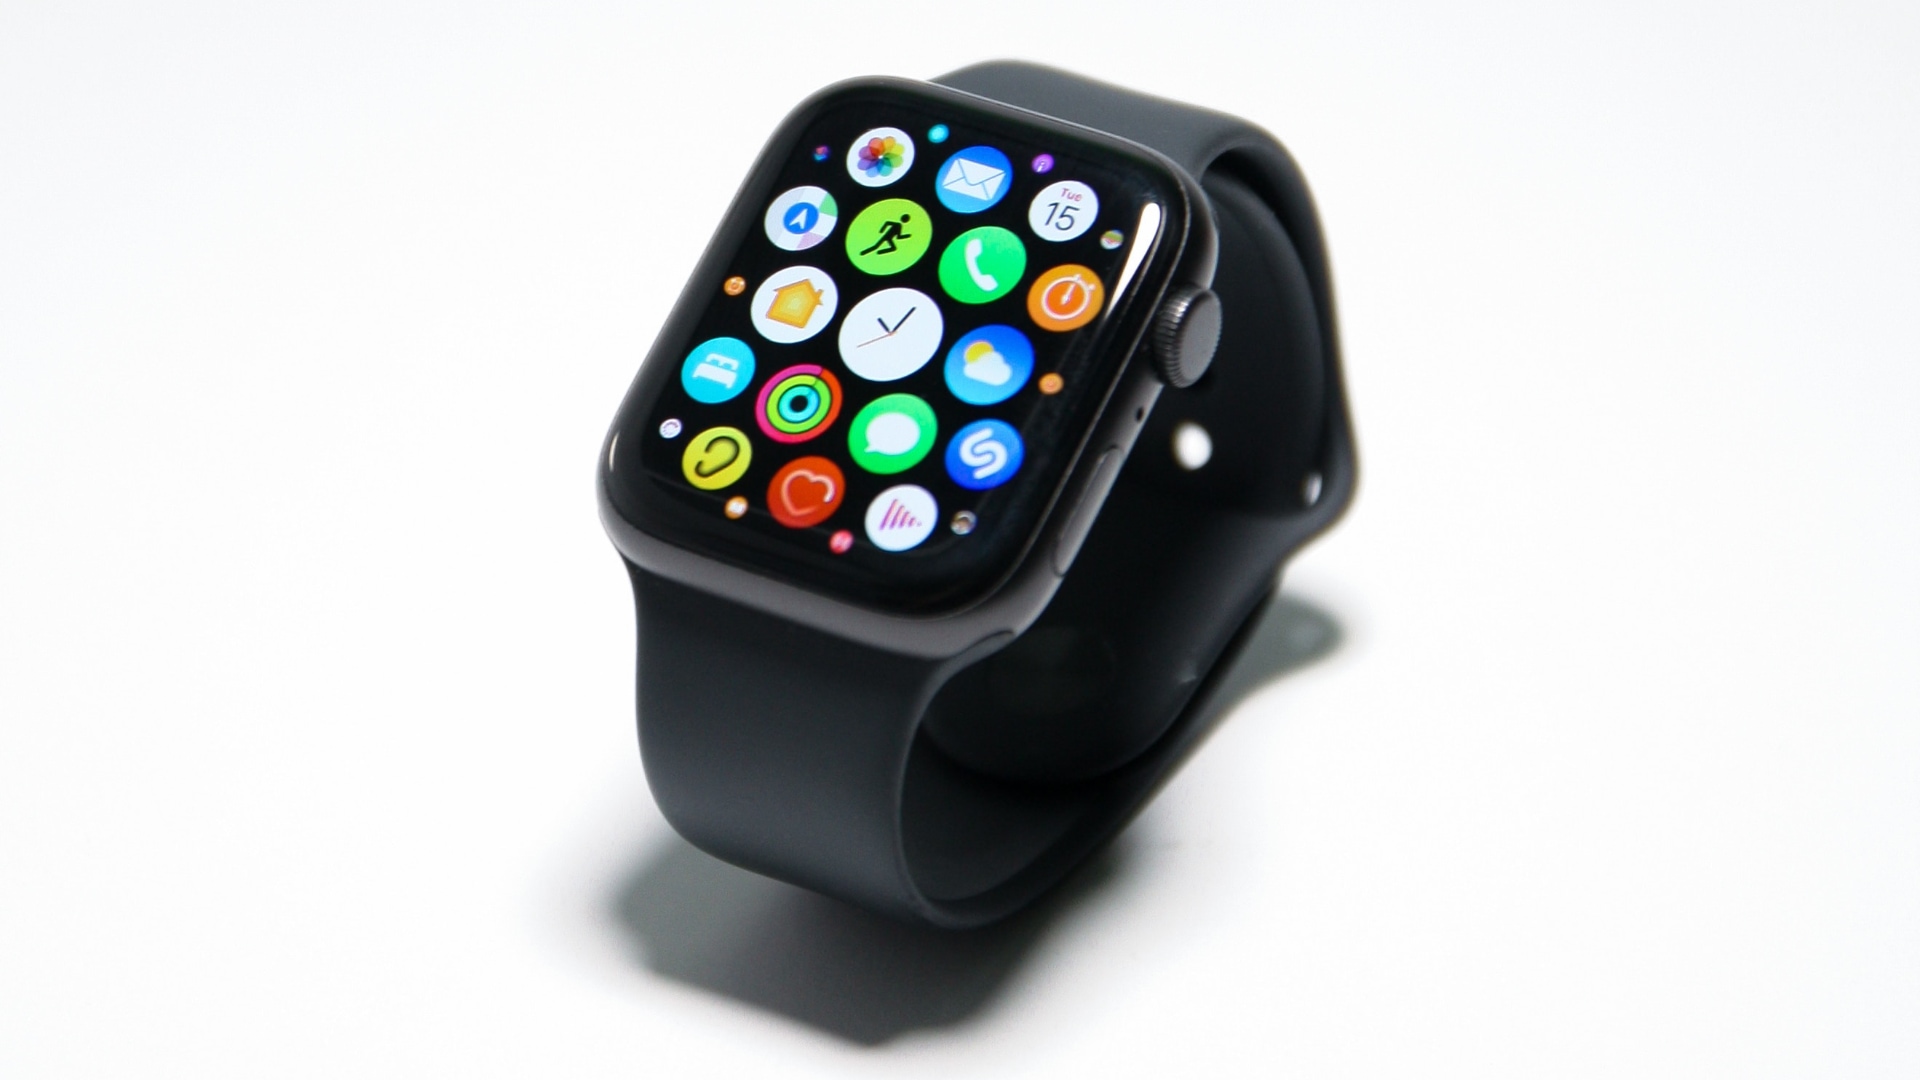 Space Gray Apple Watch SE showcasing the Home Screen with the deafult honeycomb app grid